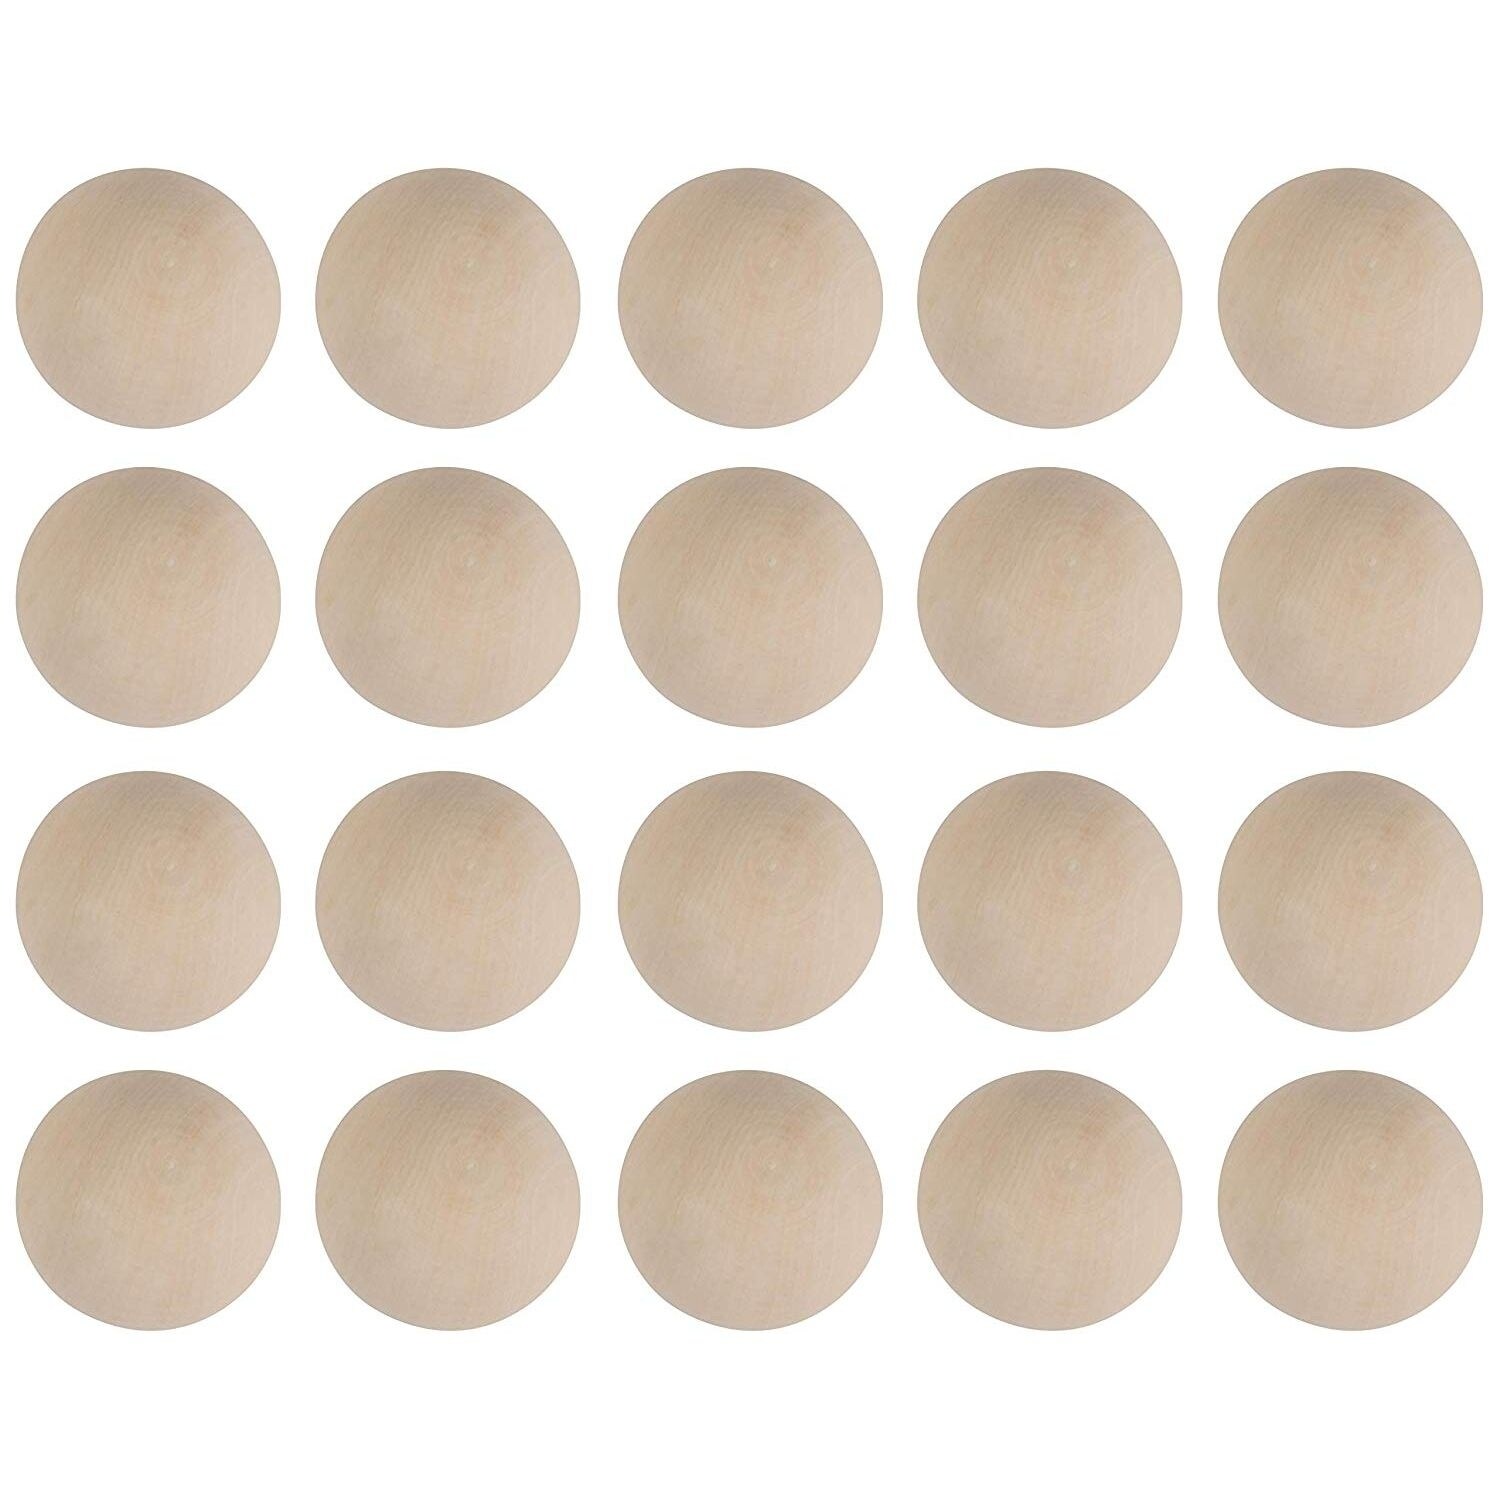 1.5 Inch Wooden Balls for Crafts, Unfinished Round Wood Spheres for DIY  Projects (20 Pack)